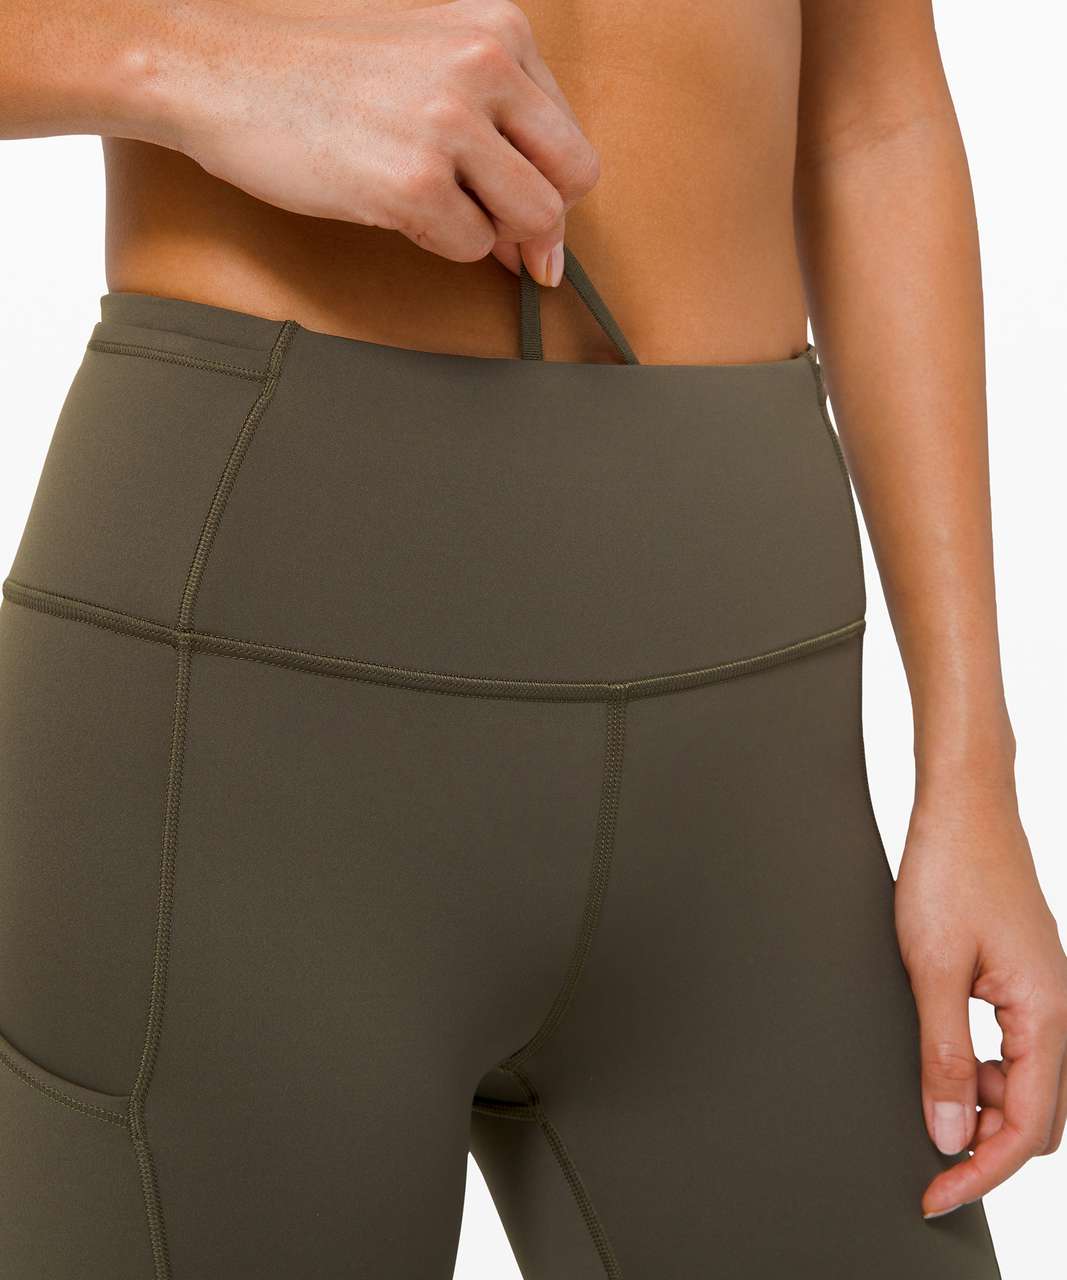 Lululemon Fast and Free Tight 28" *Non-Reflective - Dark Olive